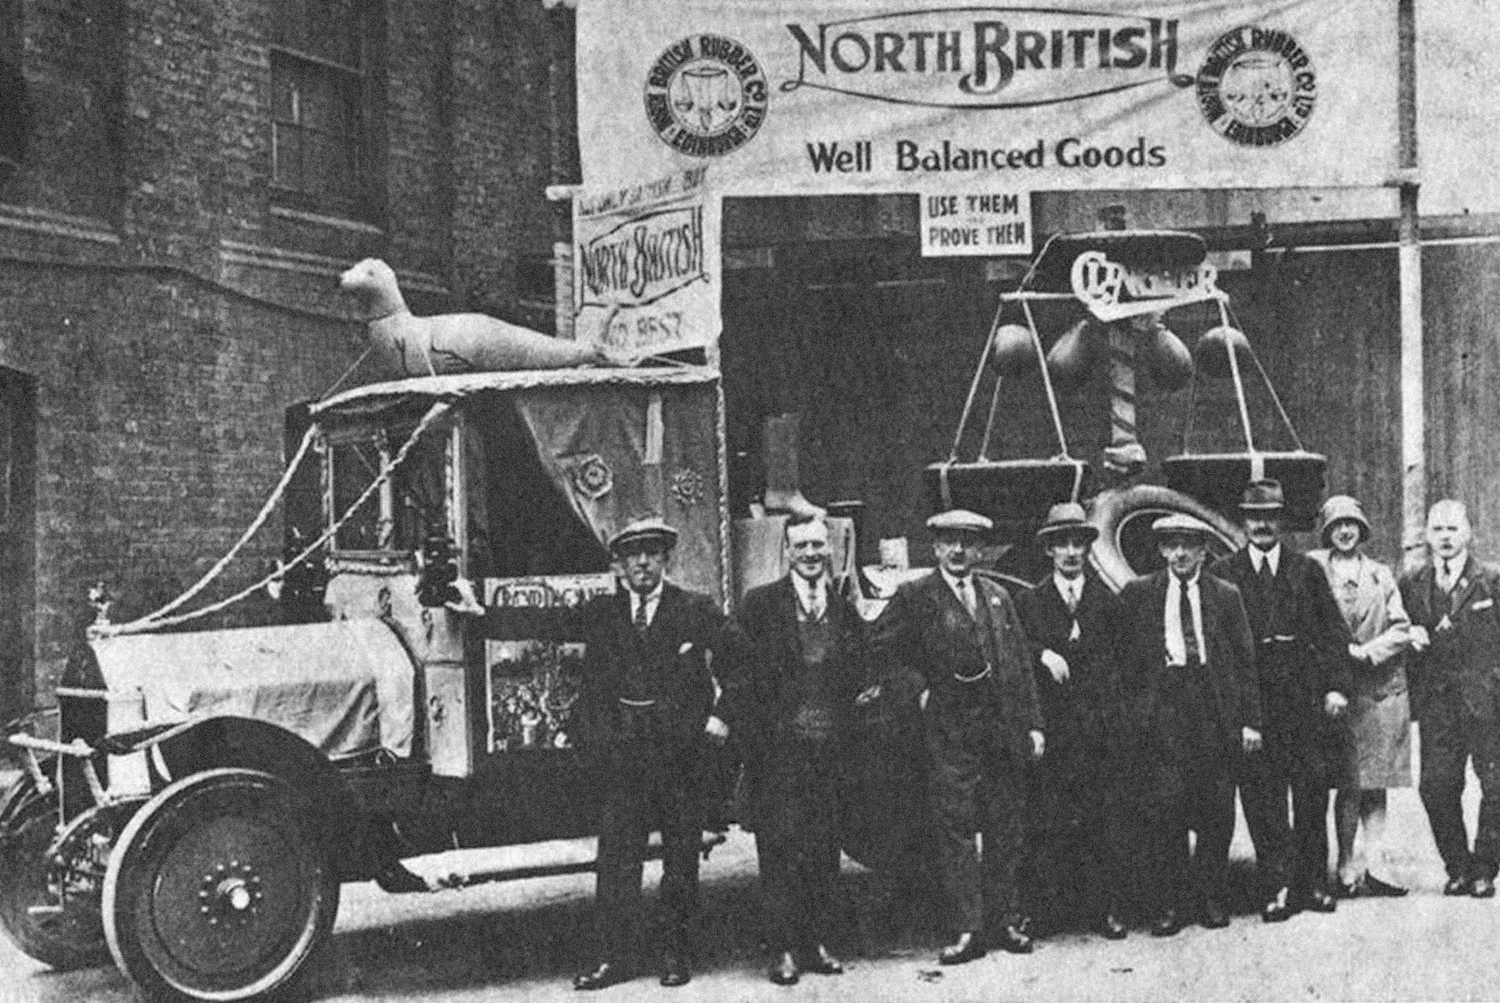 Photos from the North British Rubber Company era